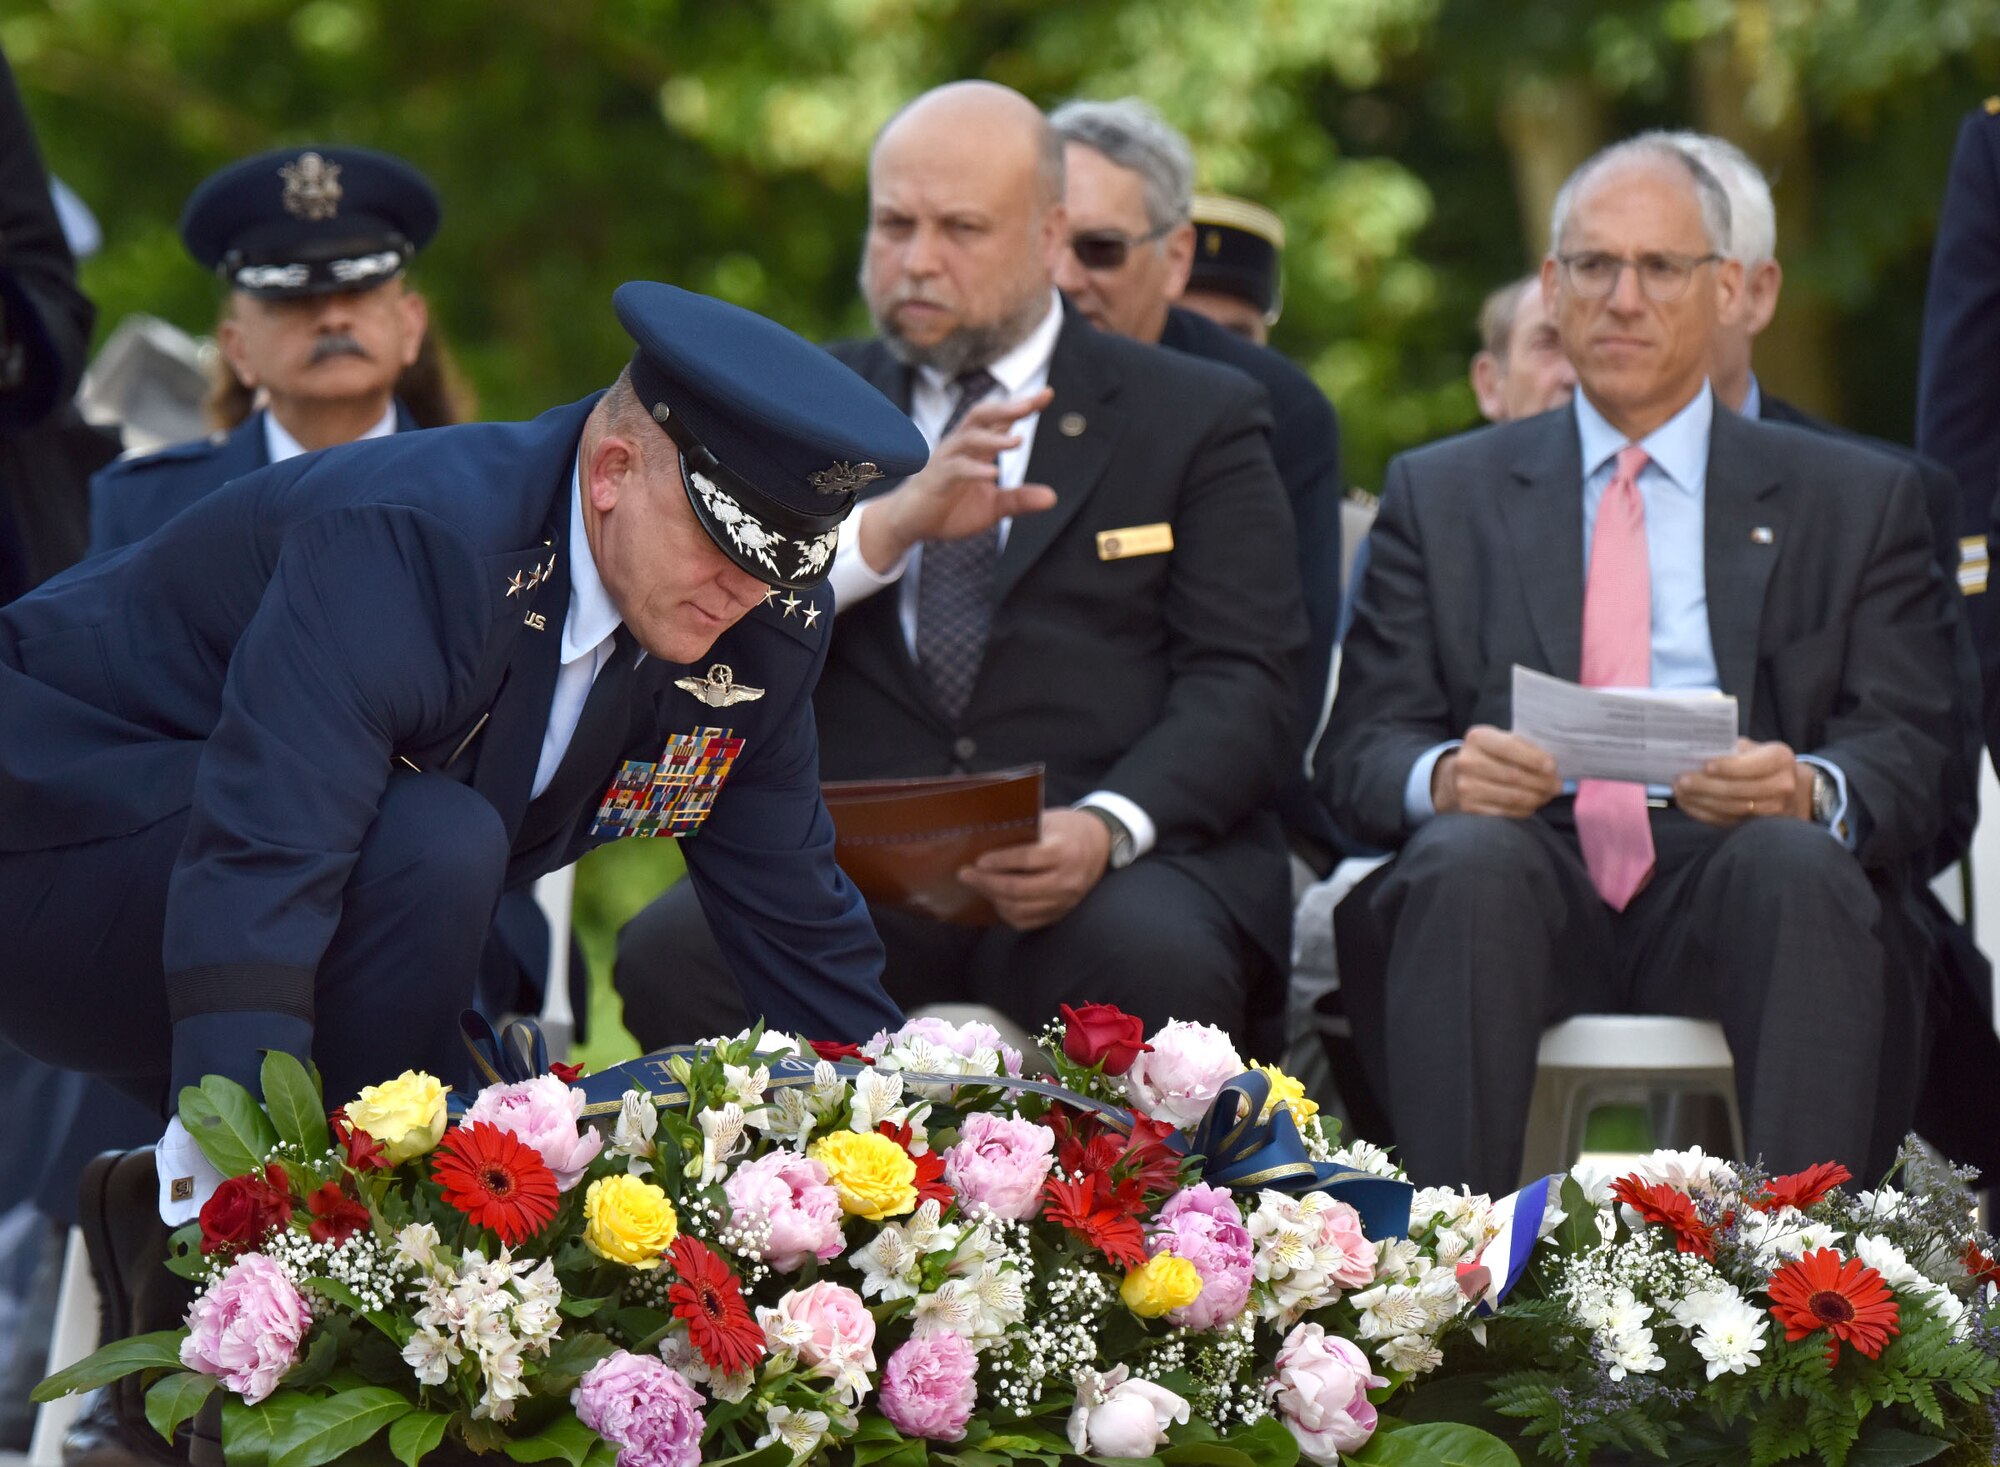 PARIS - U.S. Air Force Gen. Frank Gorenc, U.S. Air Forces in Europe-Air Forces Africa commander, lays a wreath a Memorial Day ceremony at the Lafayette Escadrille Memorial, in Marnes-la-Coquette, France, May 28, 2016.  The ceremony commemorated the shared sacrifices of French and American forces, and recognizing the enduring relationship the two countries have maintained for more than 240 years. (U.S. Air Force photo by Senior Master Sgt. Brian Bahret/Released) 